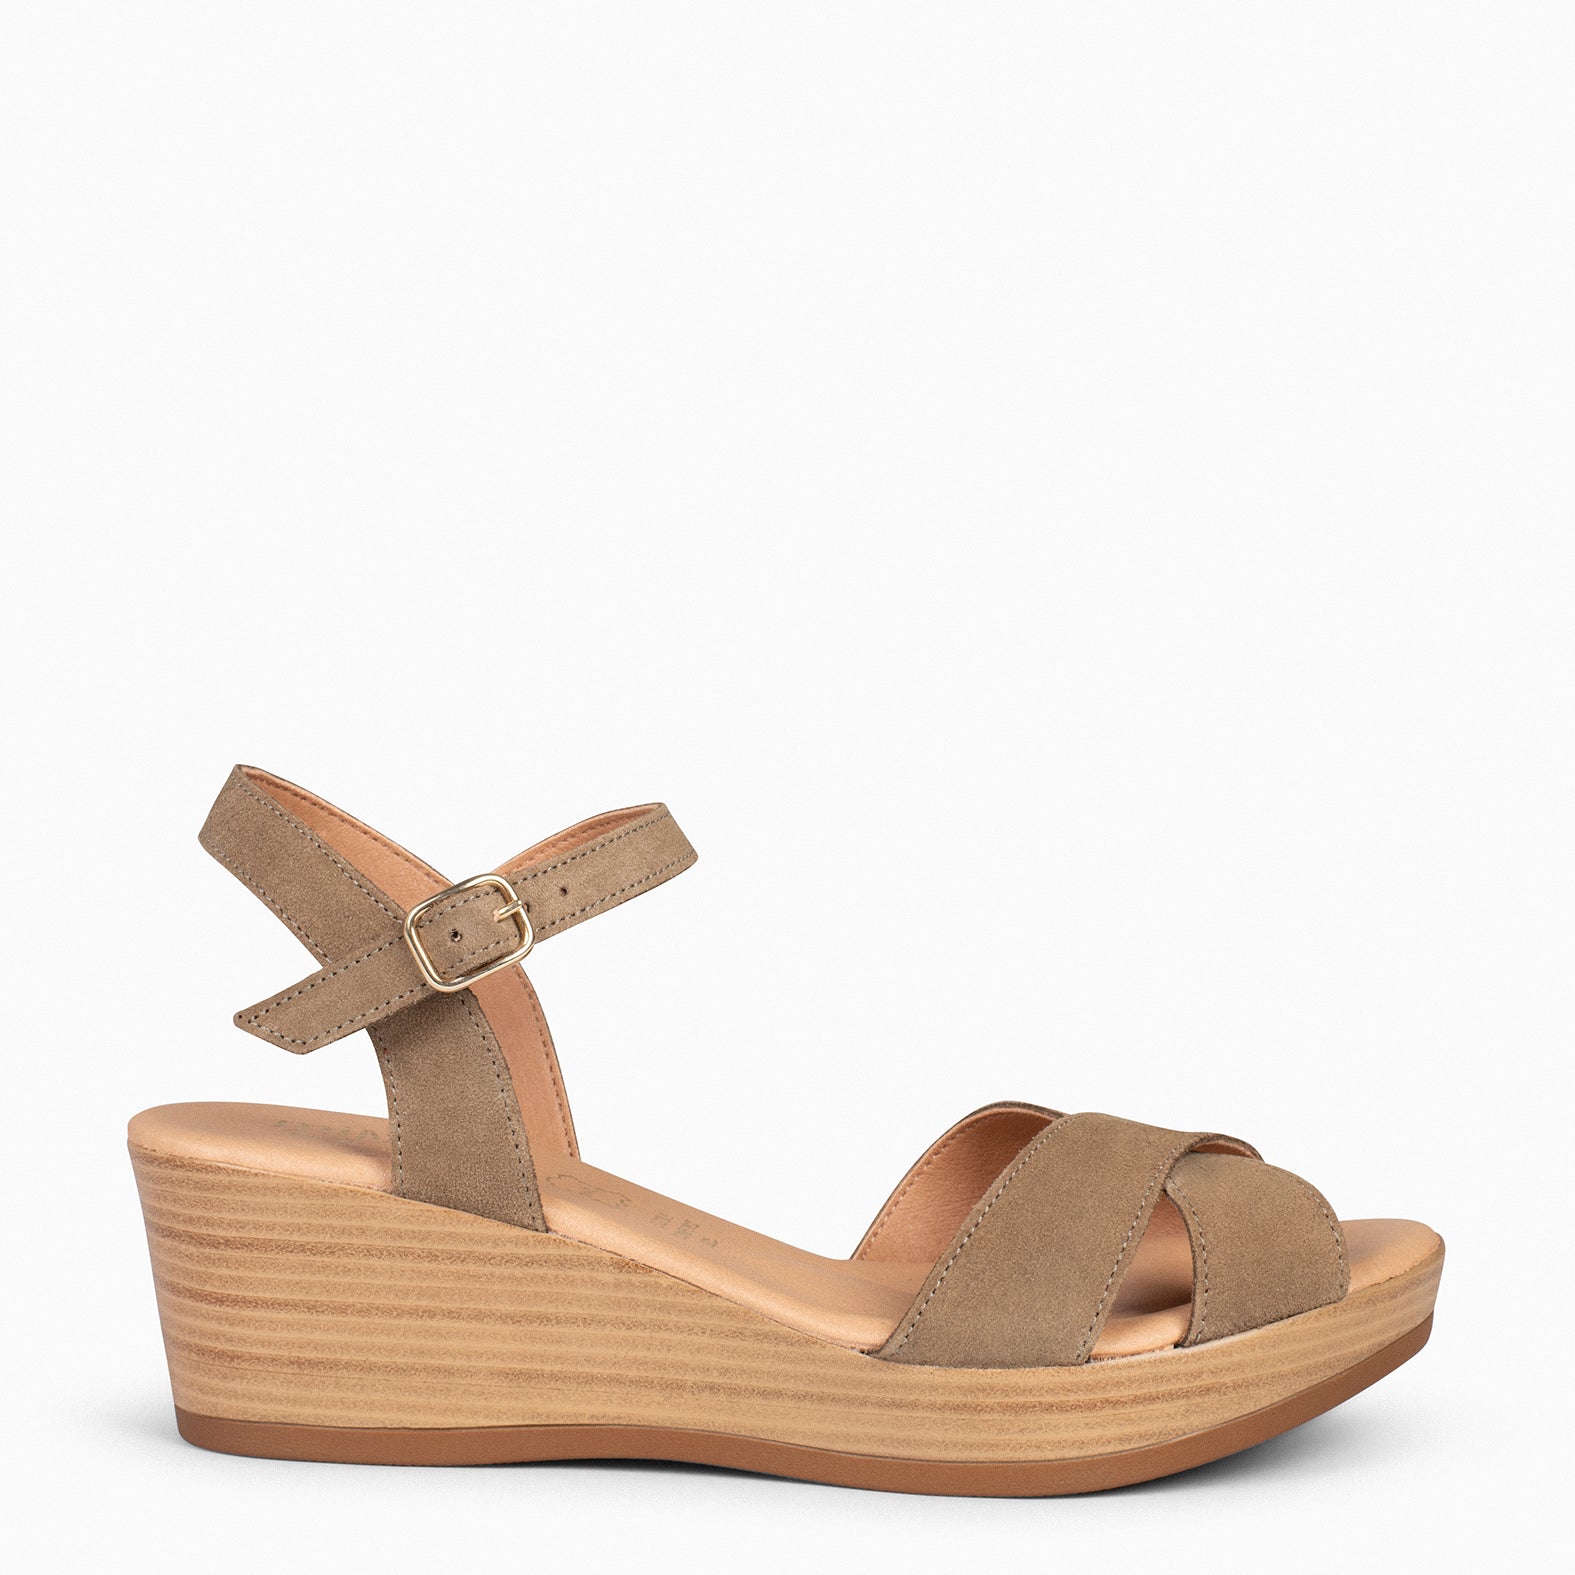 MAR – TAUPE WEDGE SHOES